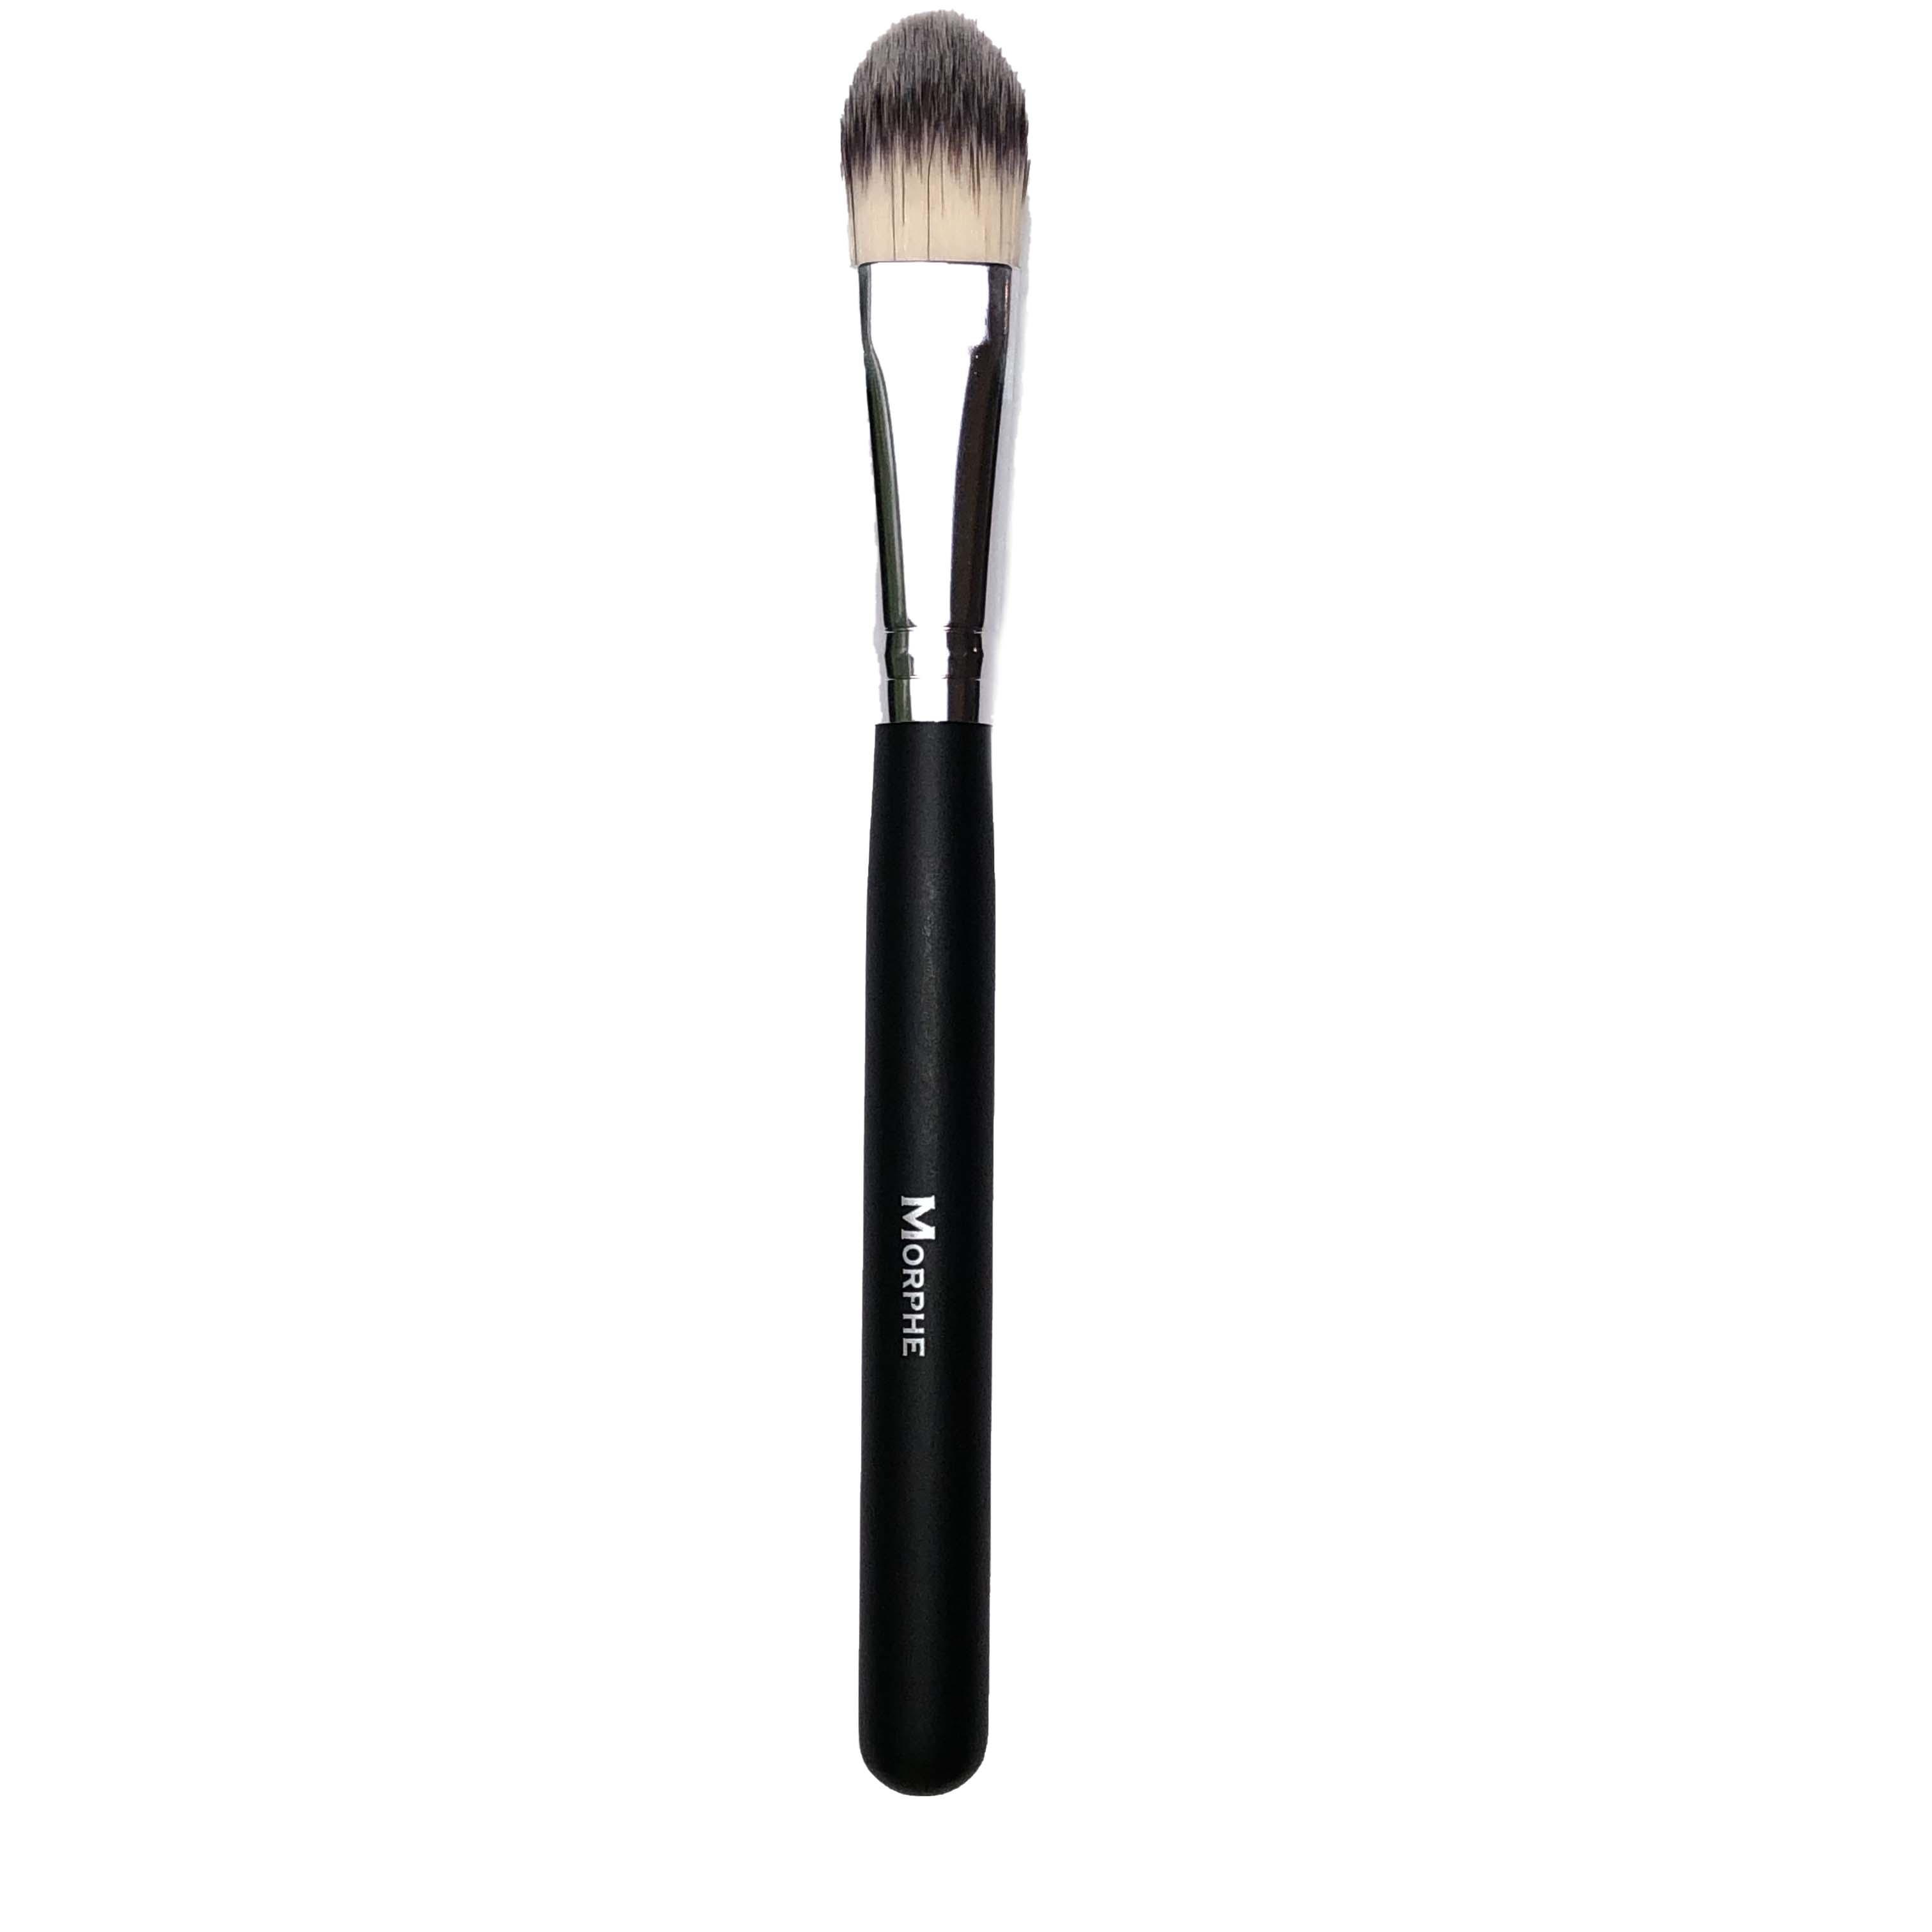 Morphe Pointed Contour Face Brush